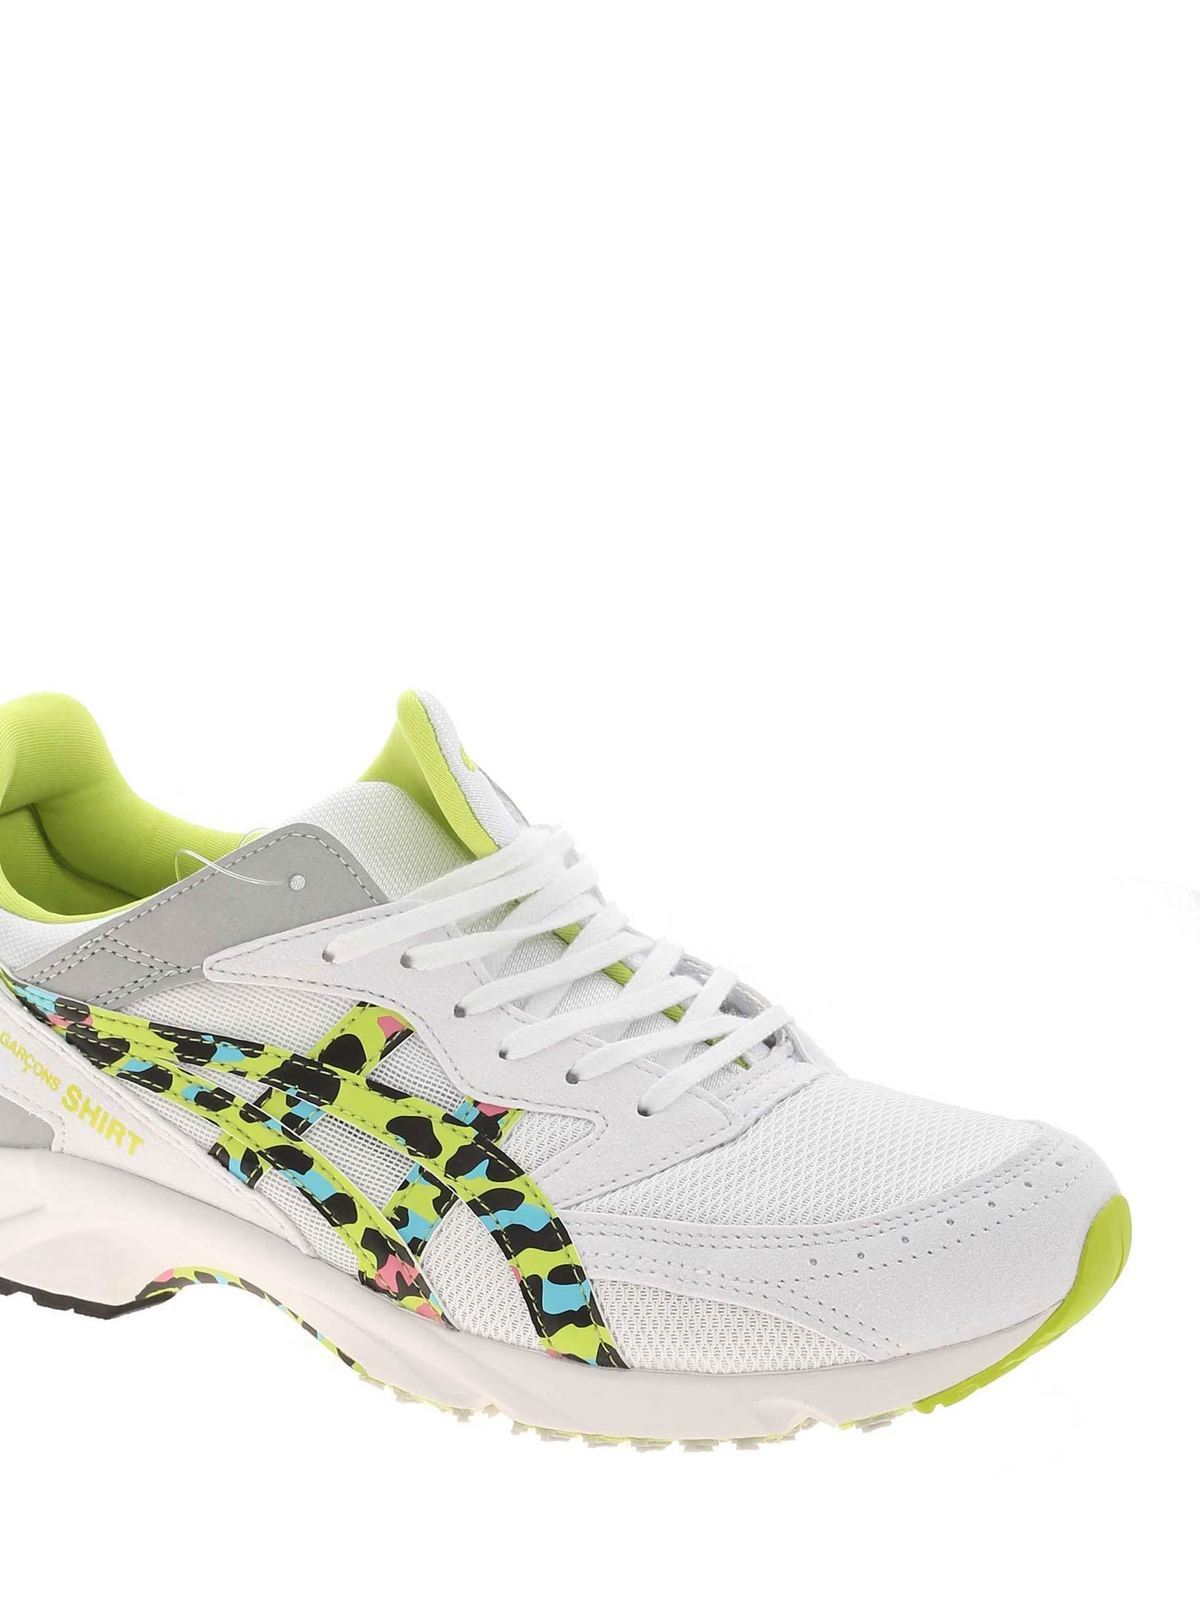 Shop Comme Des Garçons Shirt Tarther Sc Sneakers In White And Fluo Yellow In Blanco